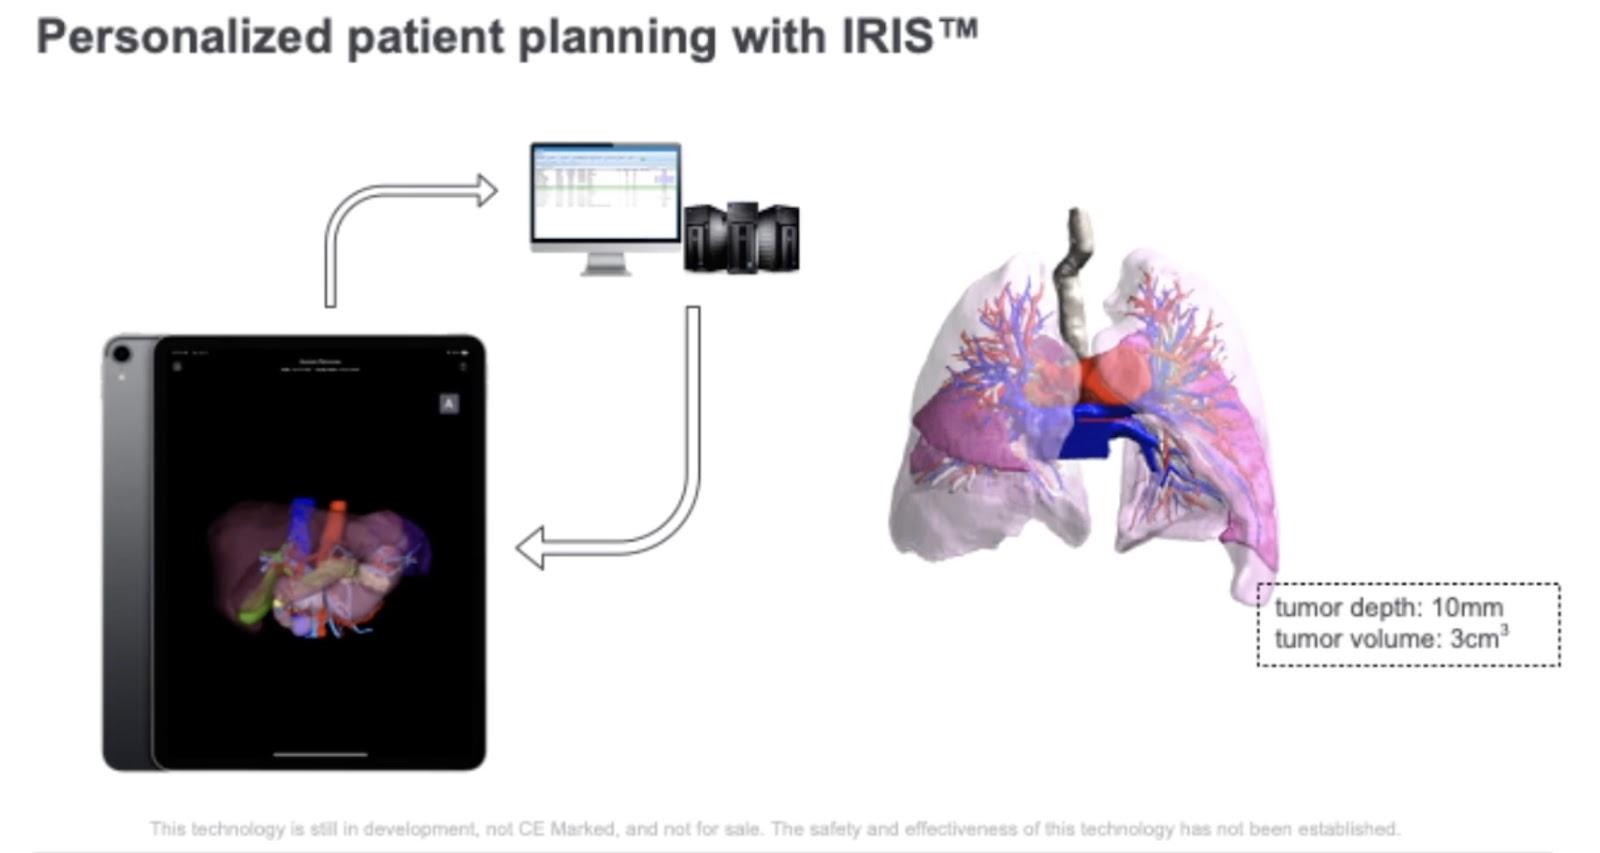 Personalized patient planning with IRIS